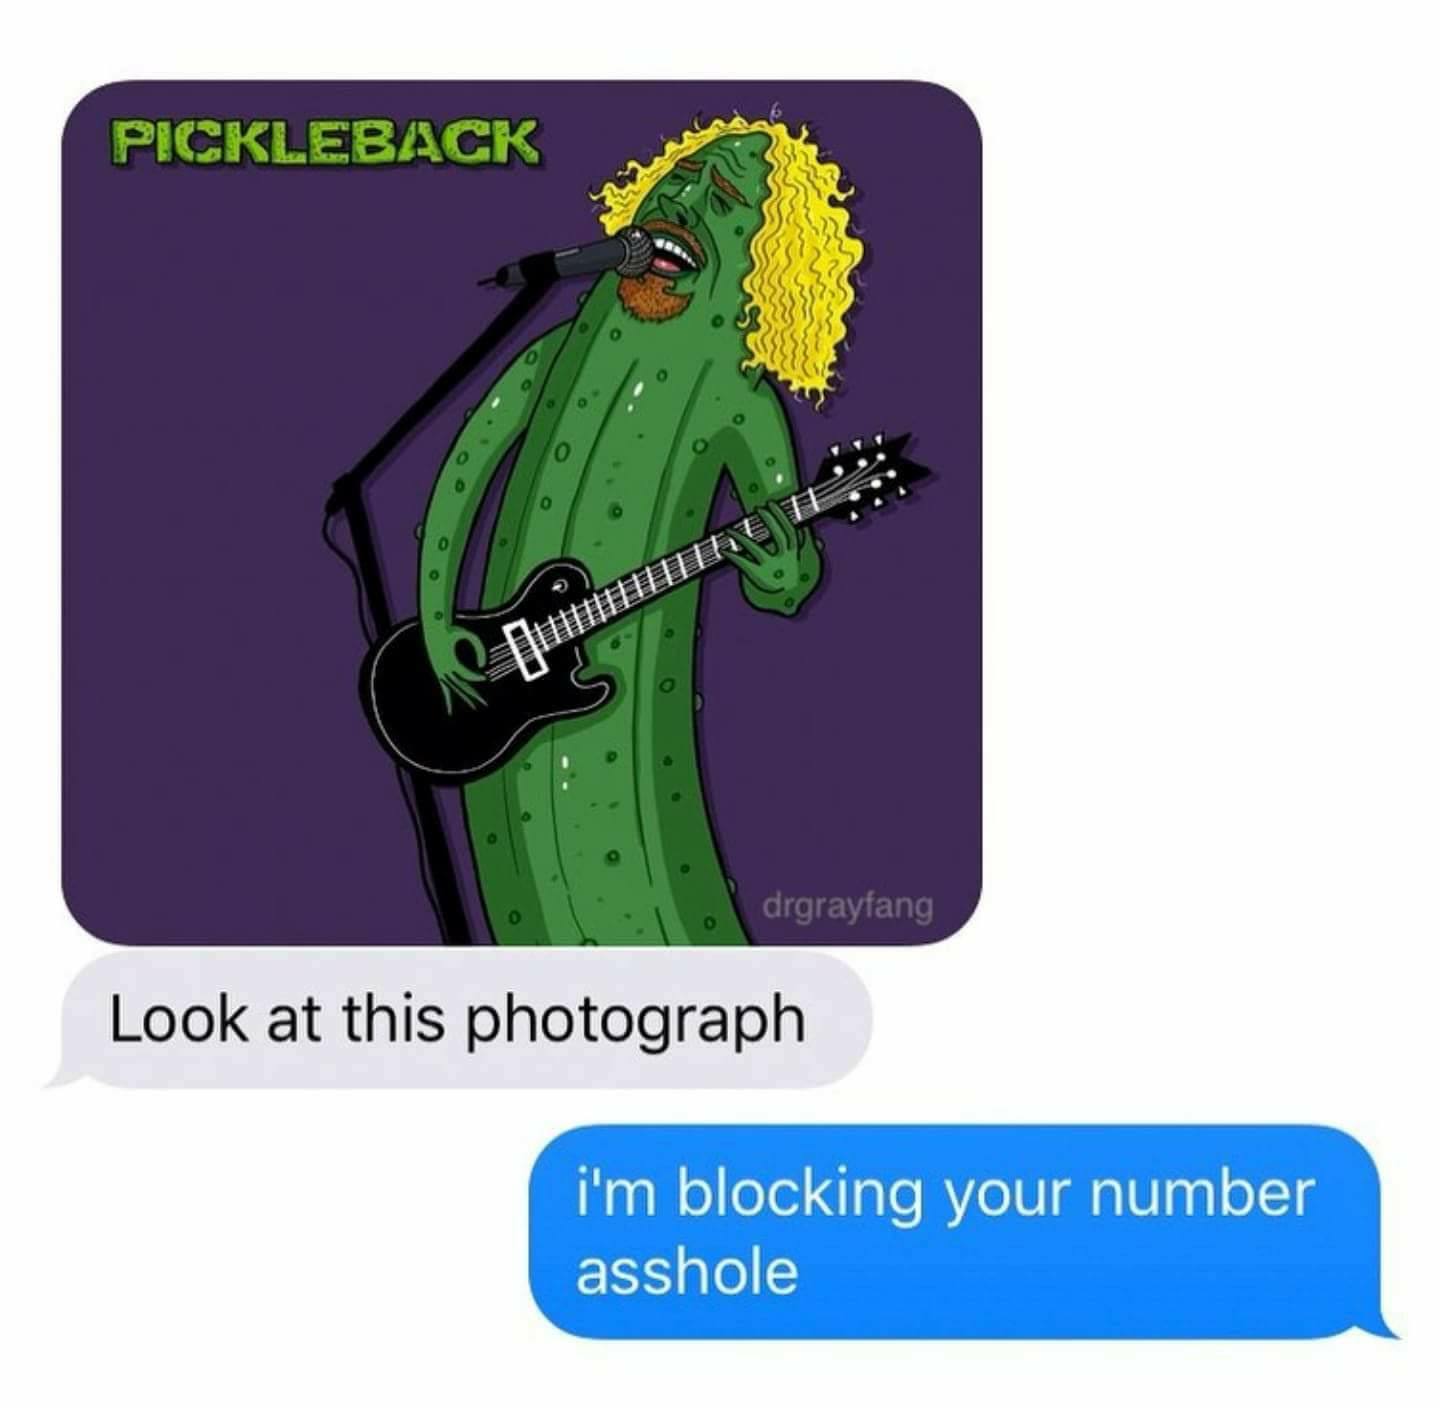 meme pickleback look at this photograph - Pickleback 3123 Ro drgrayfang Look at this photograph i'm blocking your number asshole